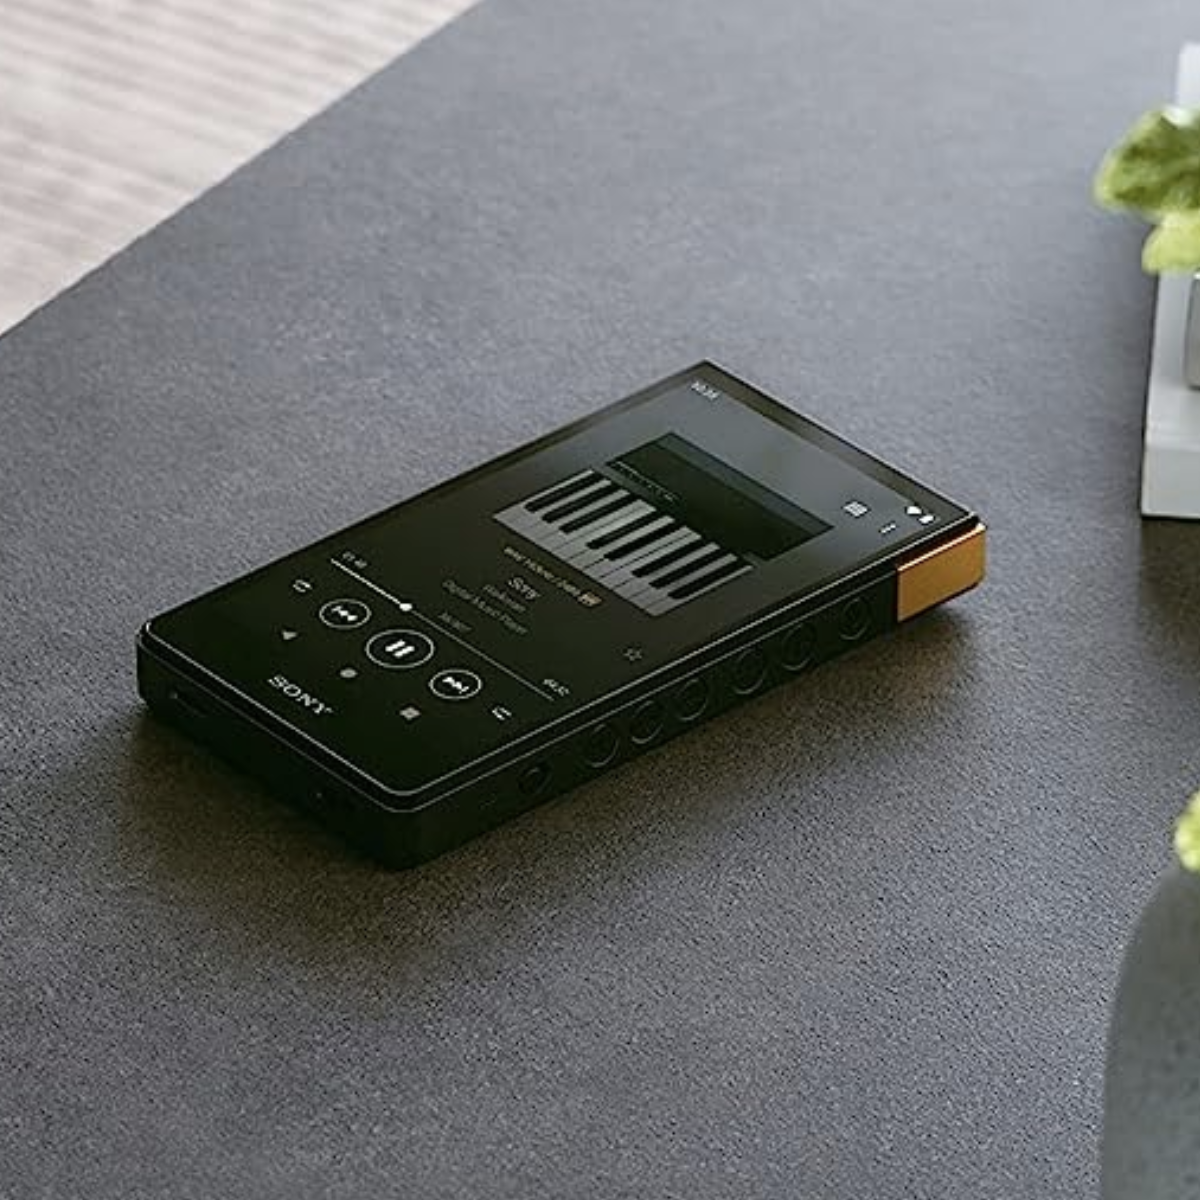 Sony Walkman NW-ZX707: Your Ultimate DAP Music Player